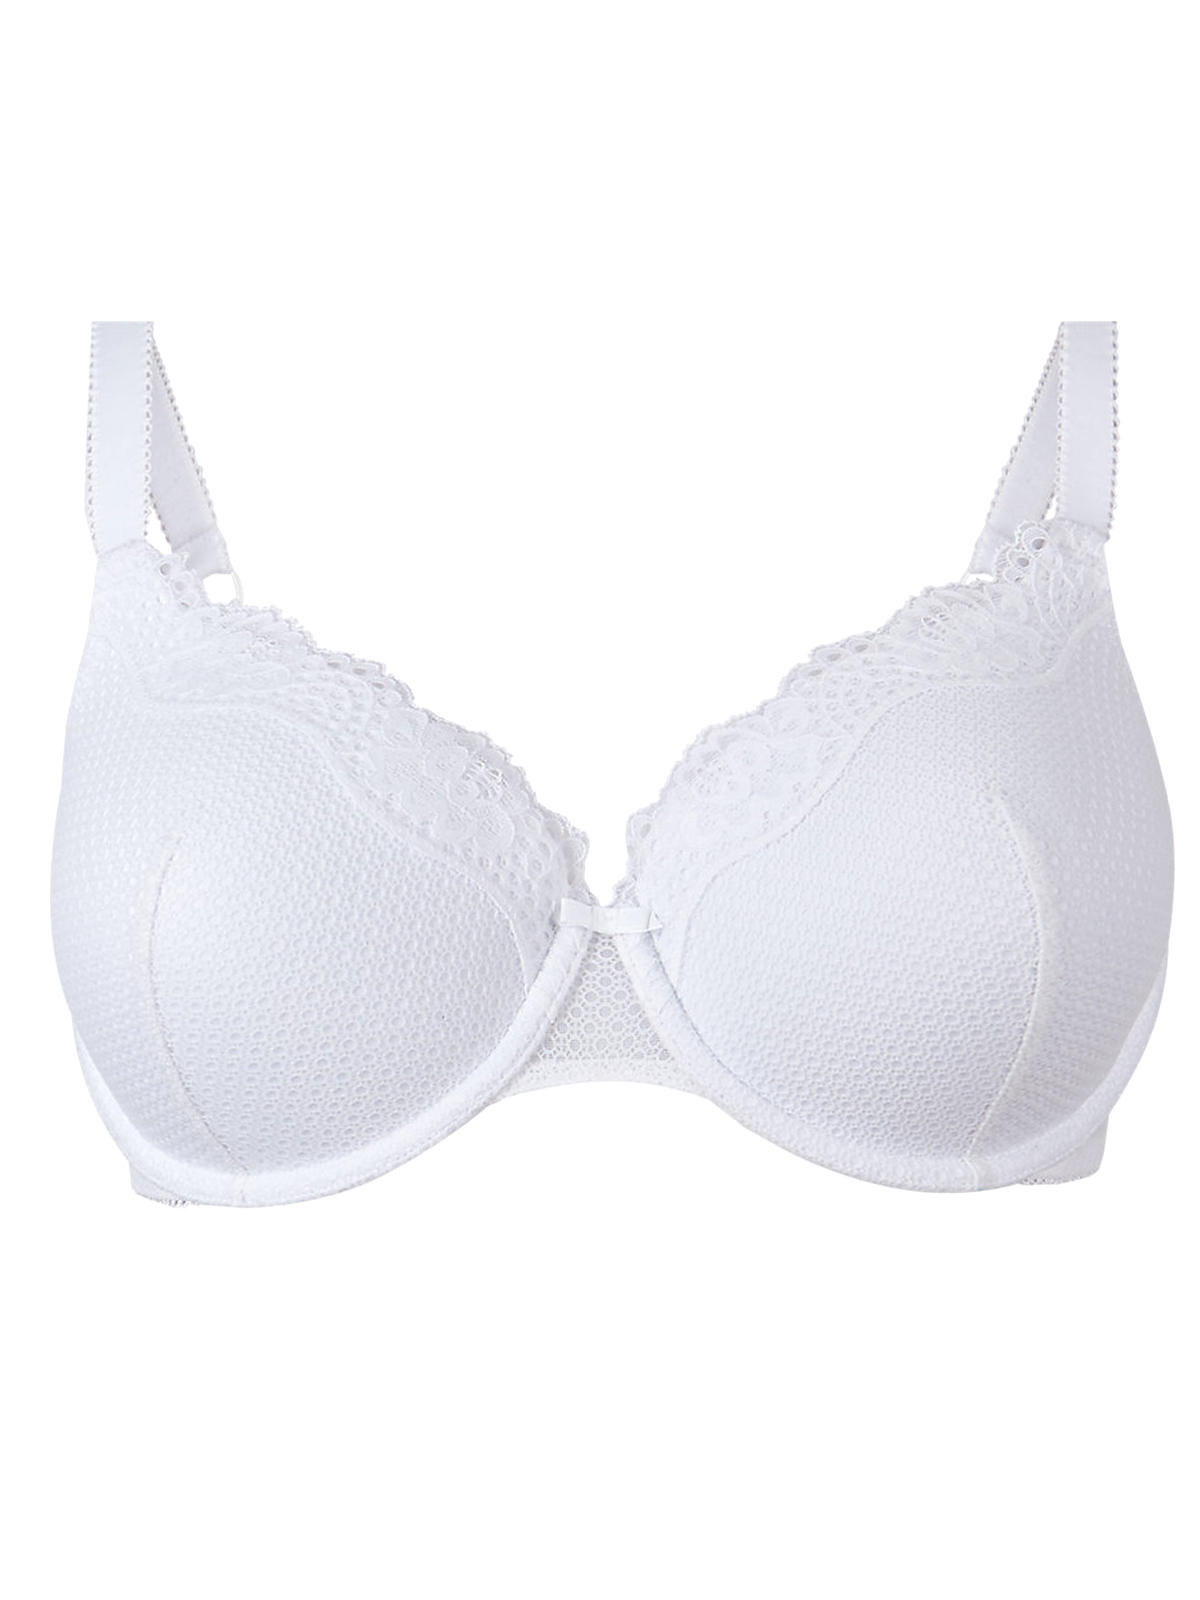 Marks and Spencer - - M&5 WHITE Lace Padded Full Cup Bra - Size 32 to ...